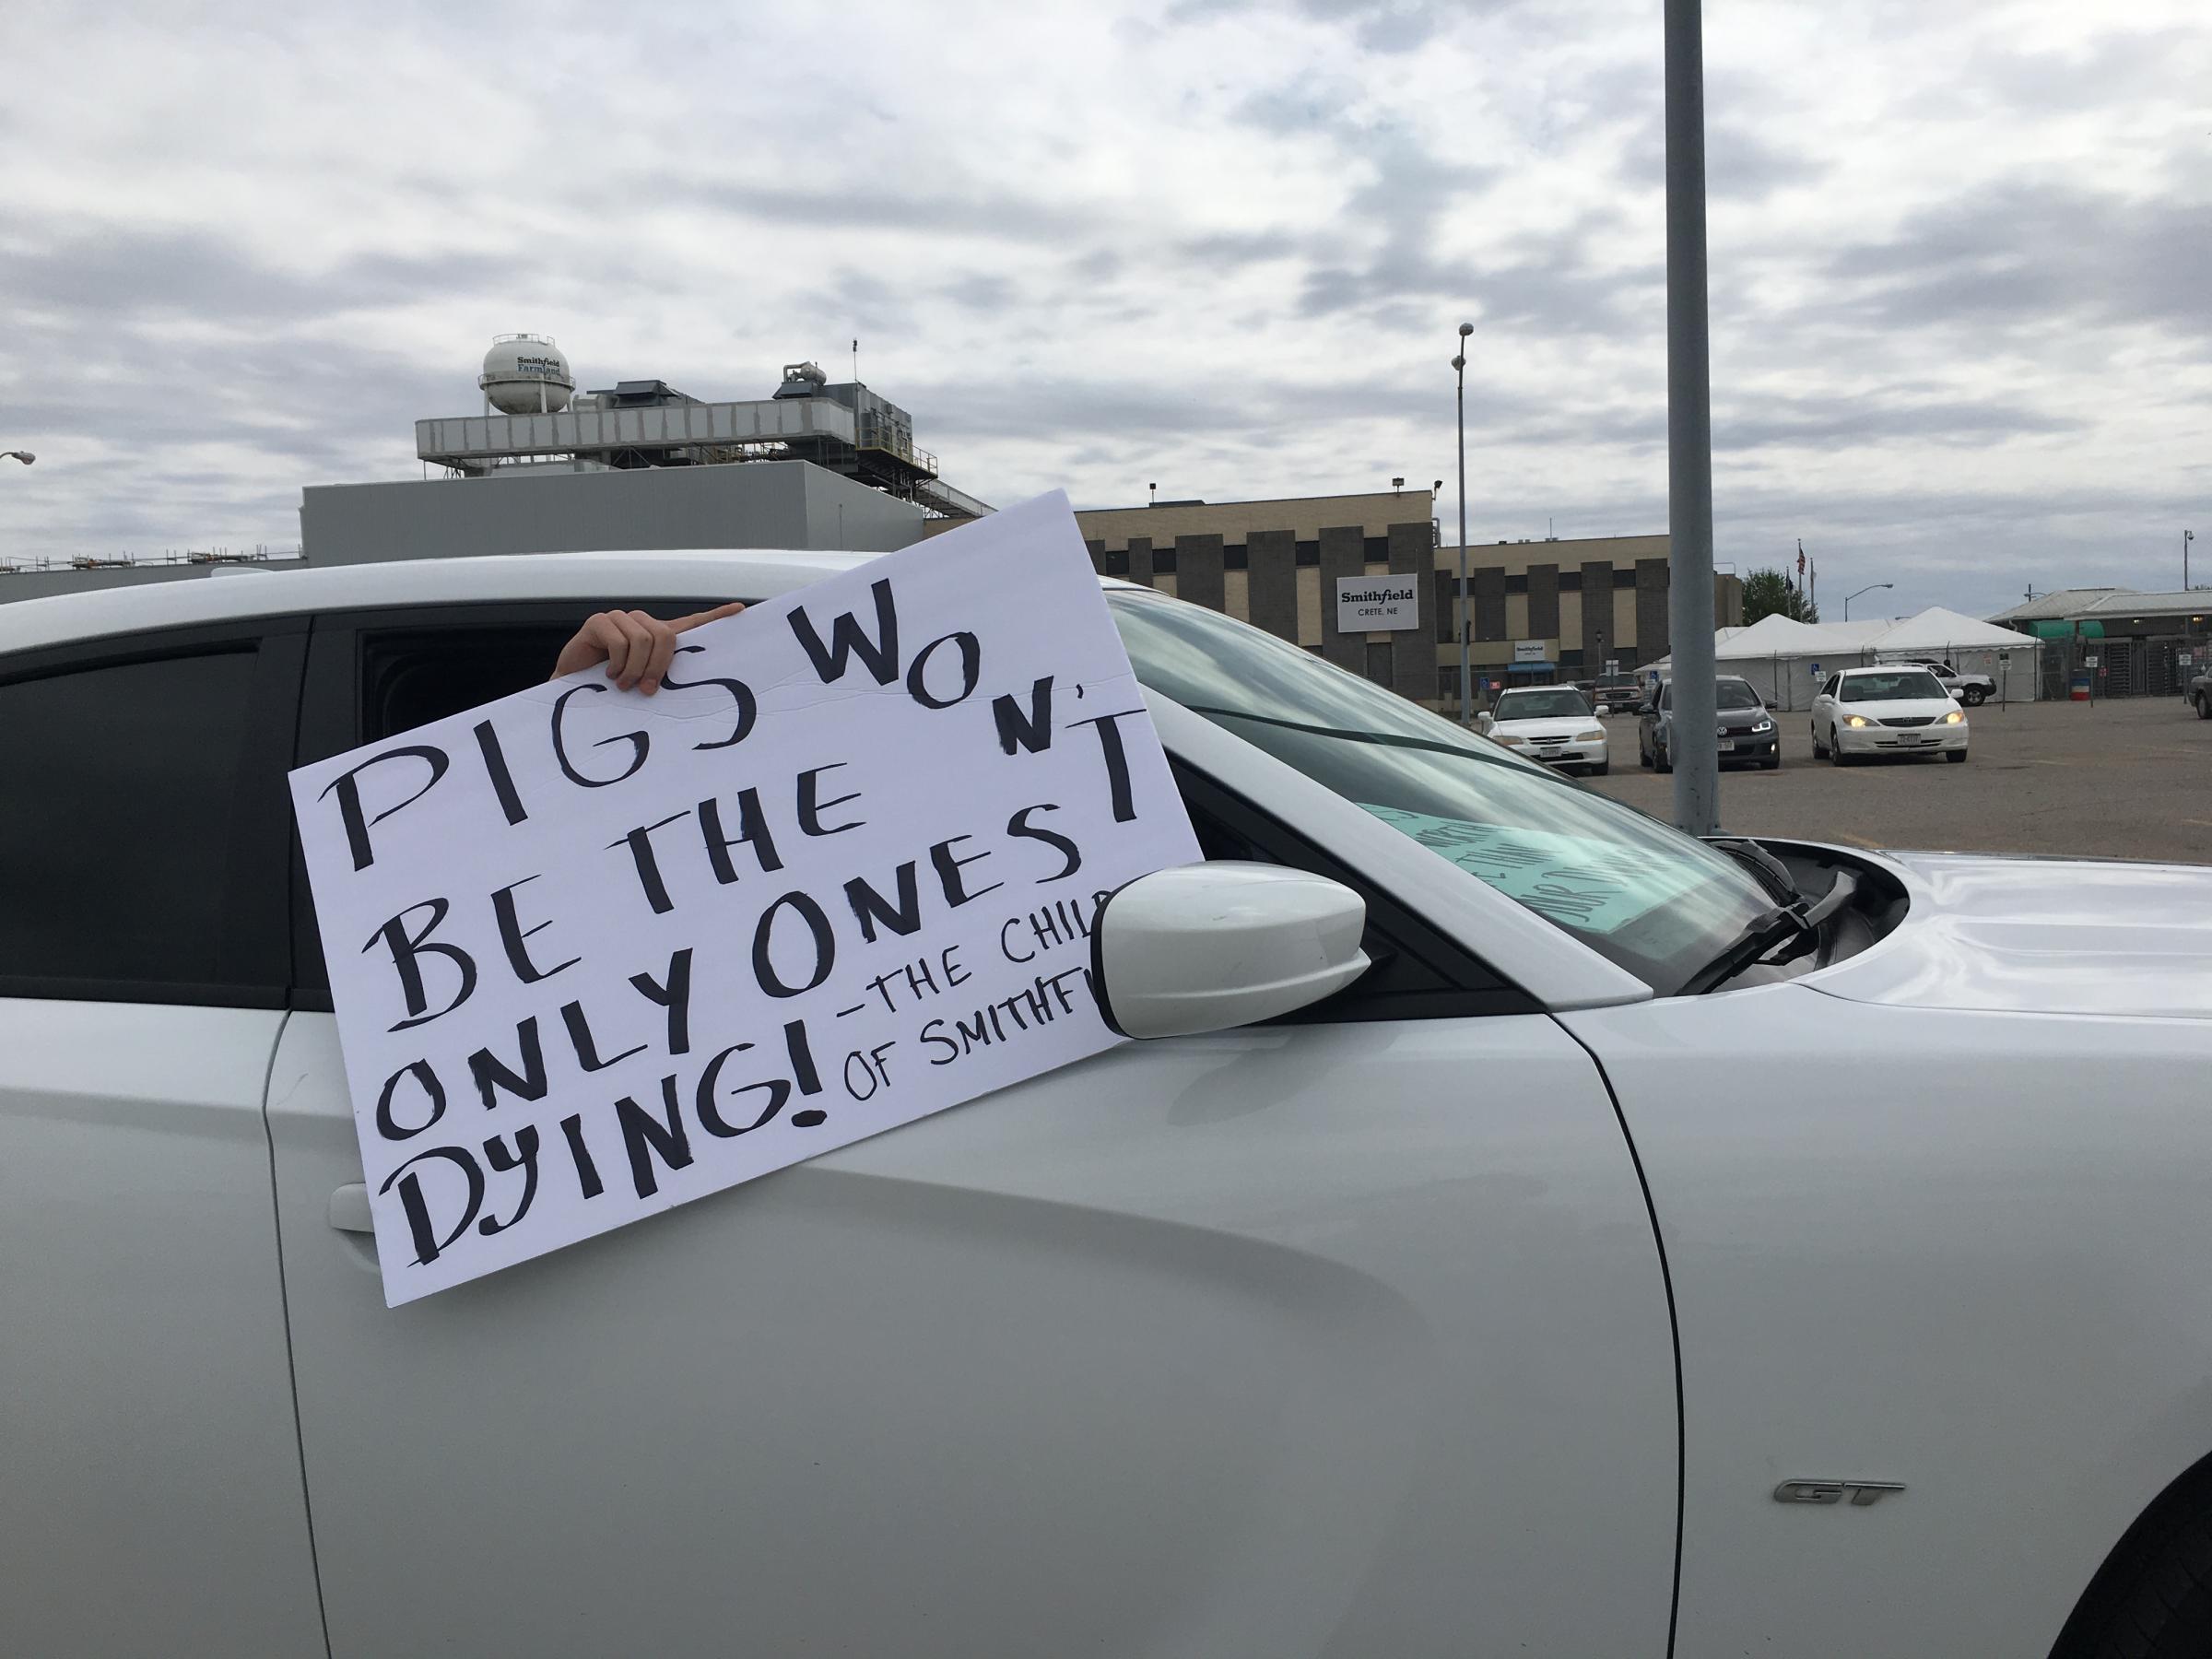 A sign in a car window that reads: Pigs won't be the only thing dying--the child of Smithfield. The Smithfield plant is in the background.